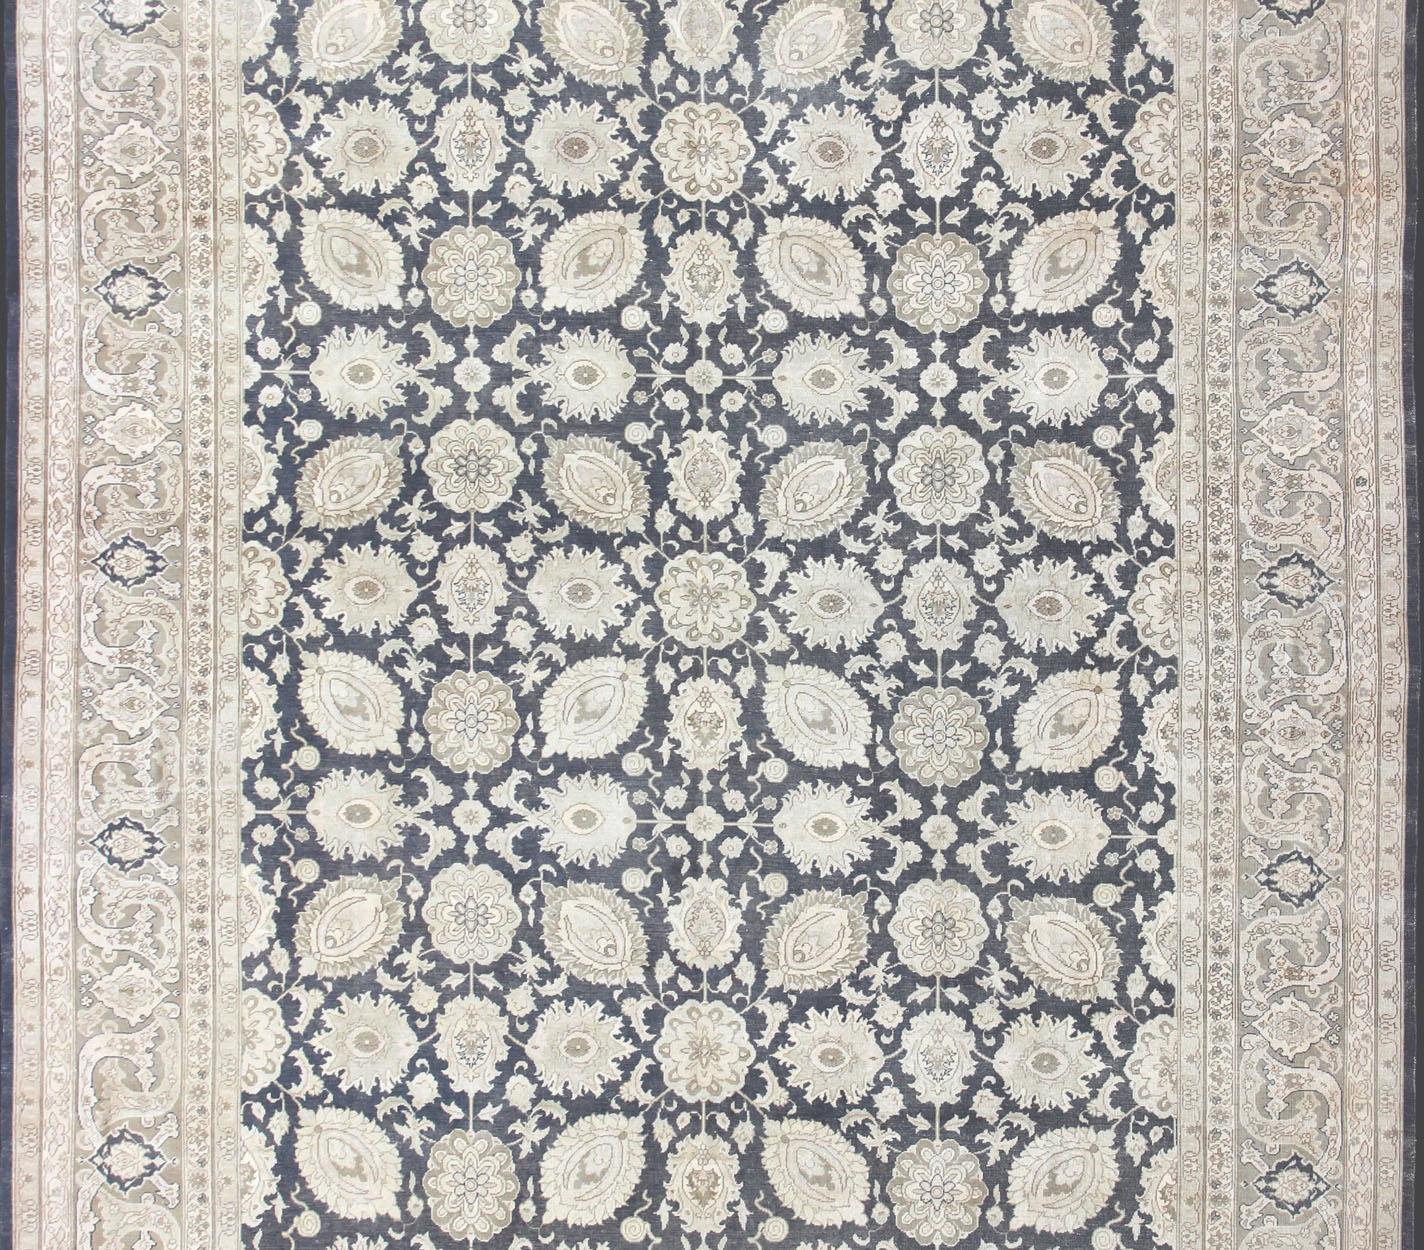 Persian Large Vintage Tabriz Rug with All-Over Motif Design in Steel Gray and Tan For Sale